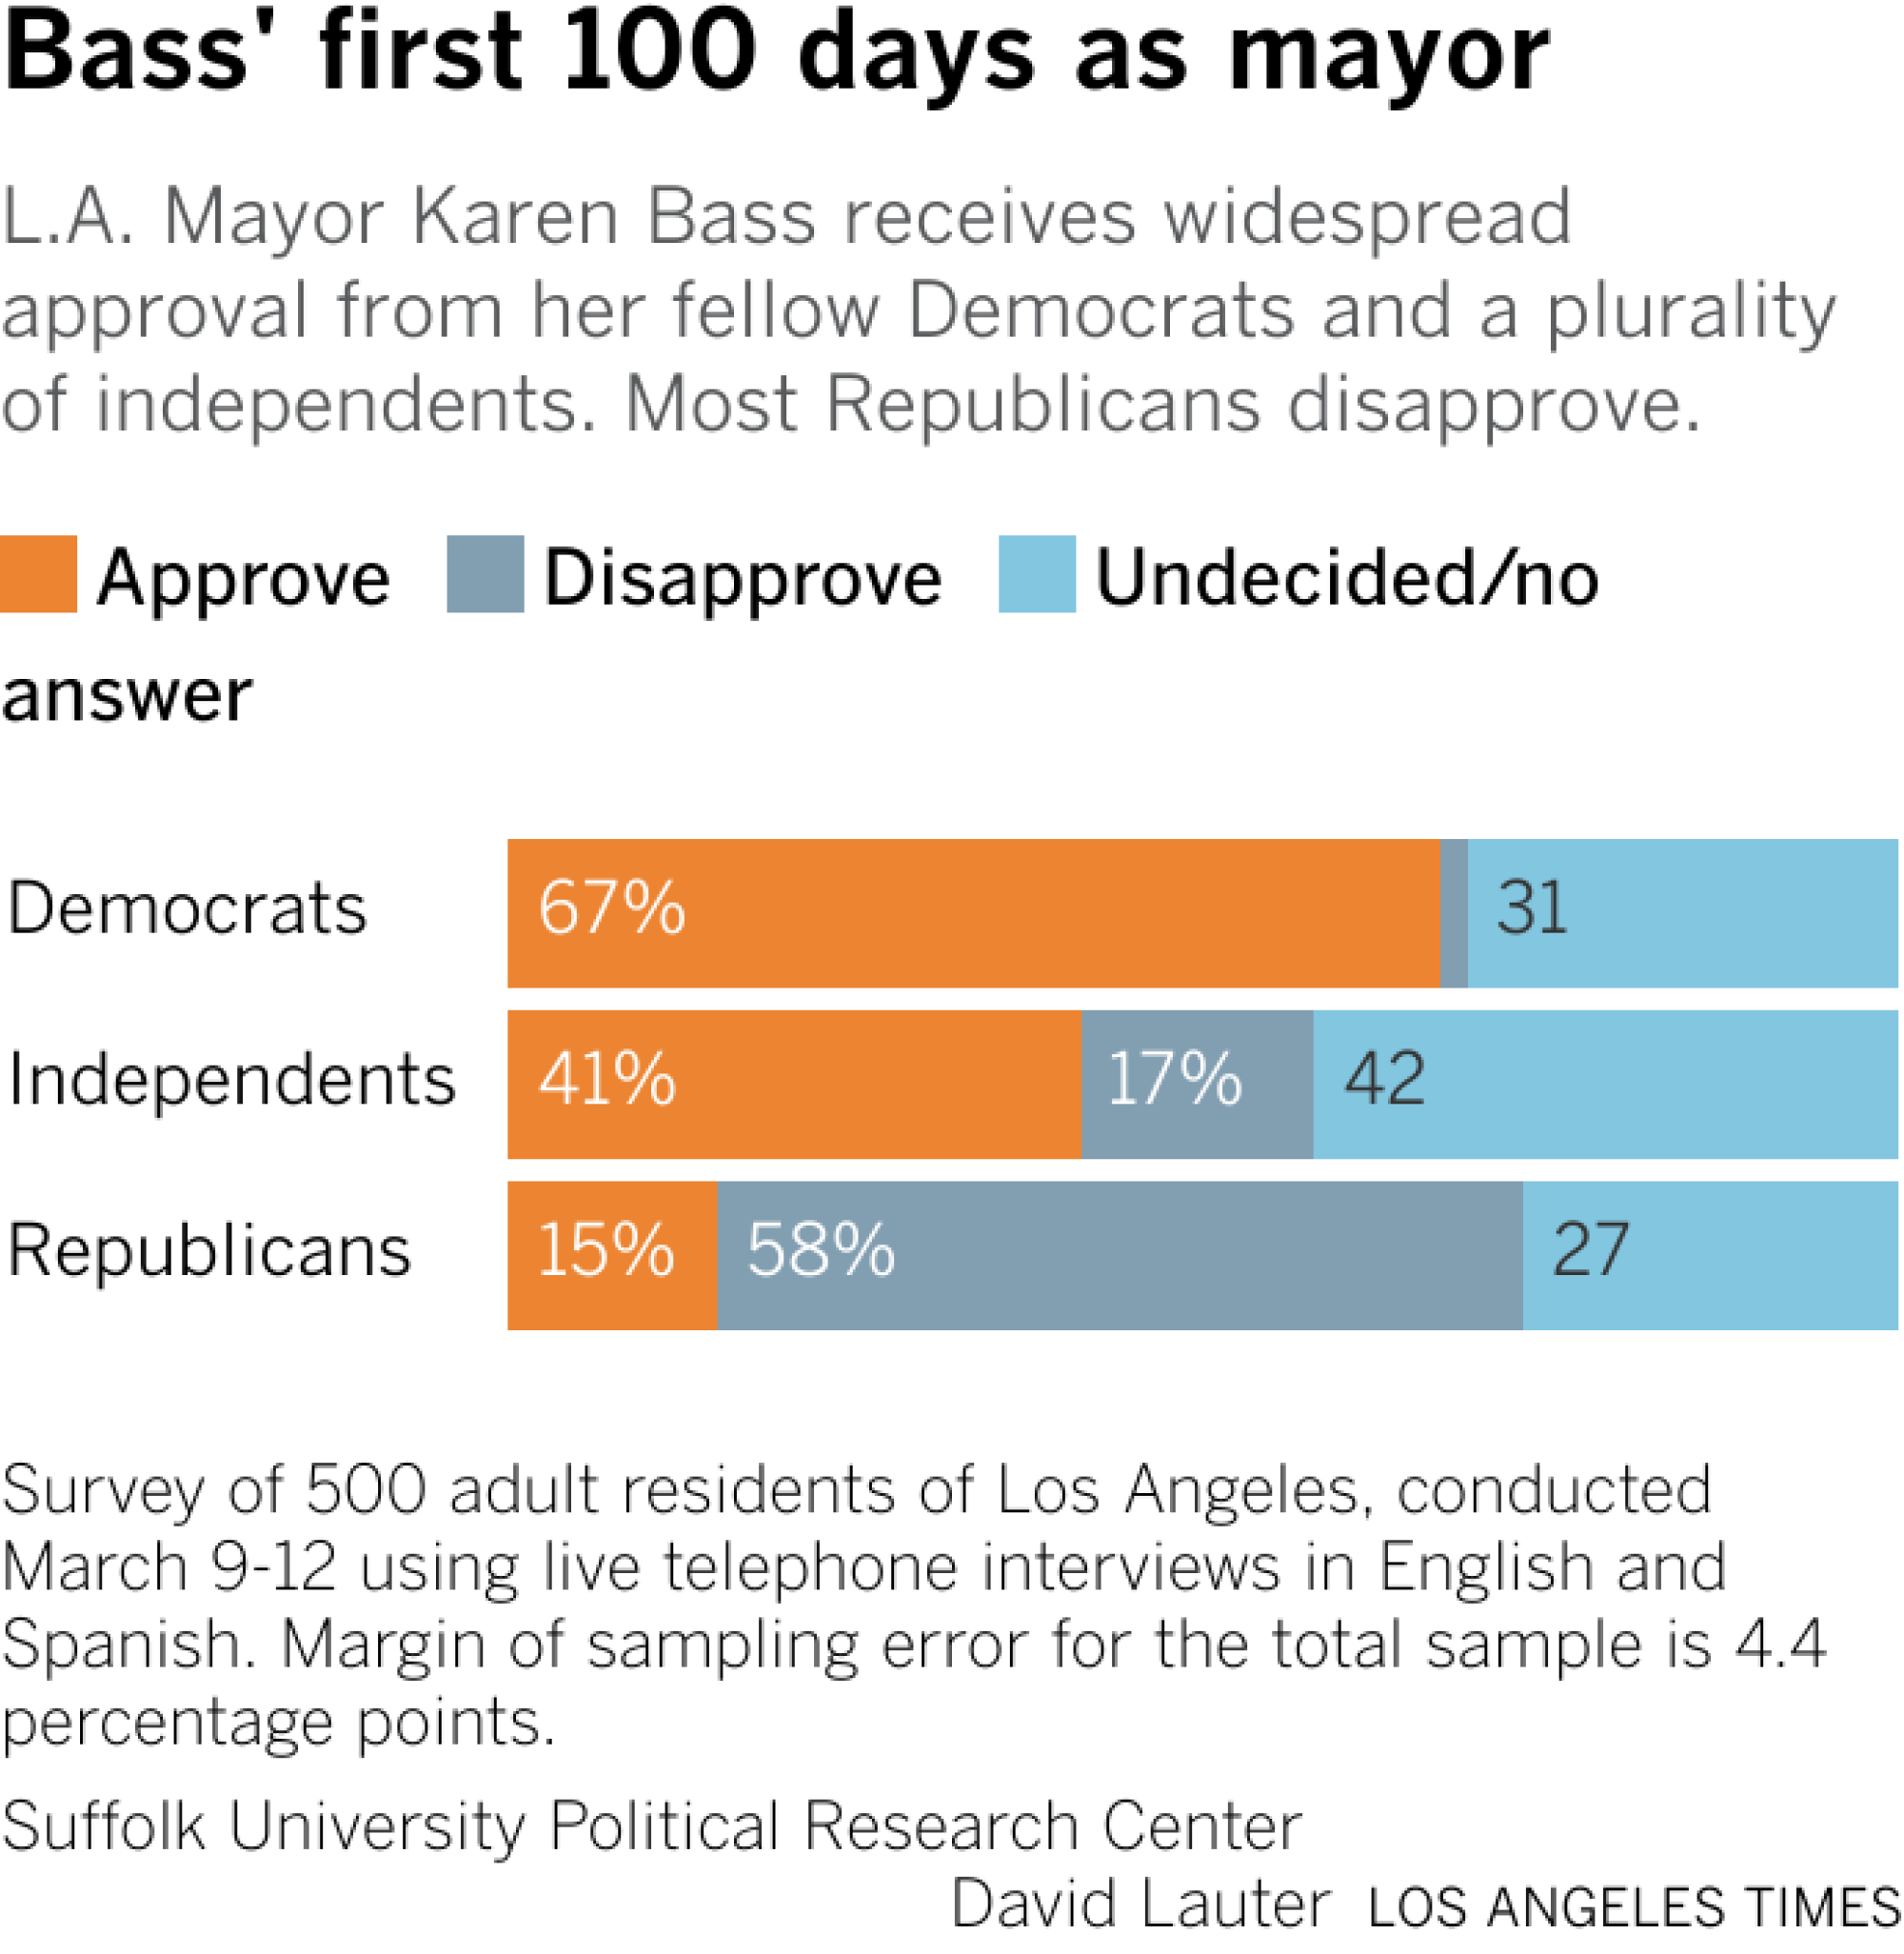 Bars show the share of the city's Democrats, independents and Republicans who approve or disapprove of Mayor Bass's job performance.